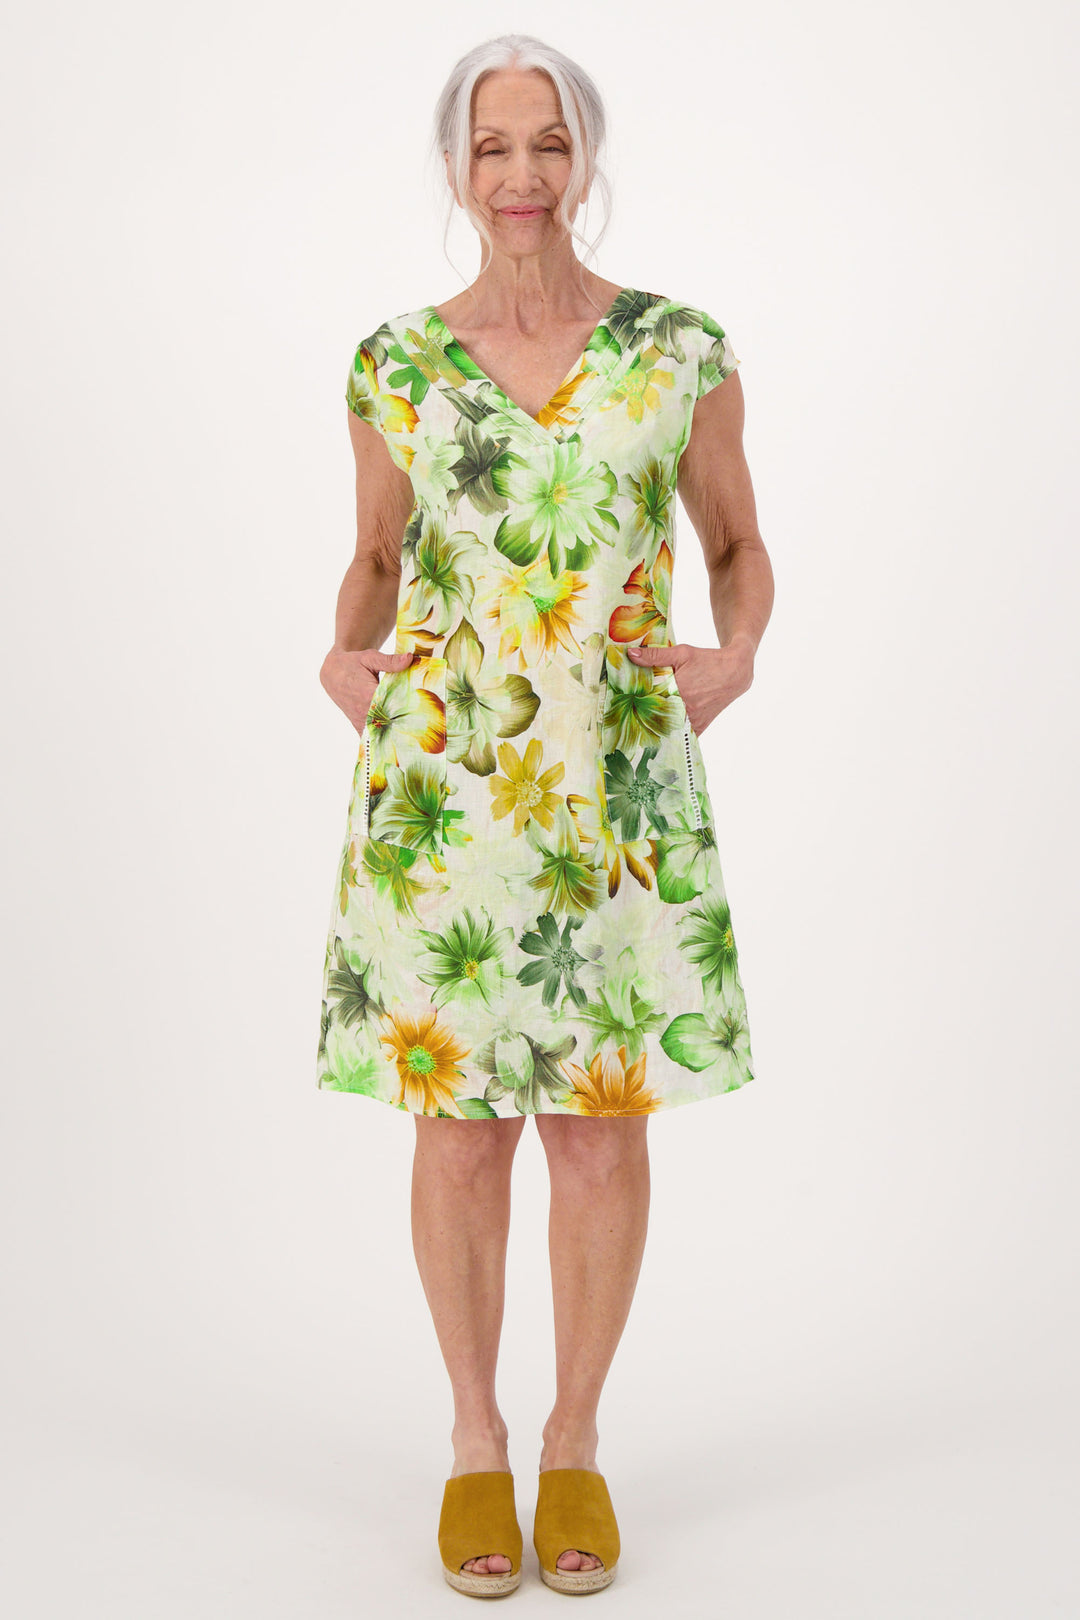 Spanner Summer 2024 Made from high quality linen, the sharp v-neck and stunning floral print will make you stand out. Perfect for any occasion, the dress falls just above the knees for a smart and stylish look.